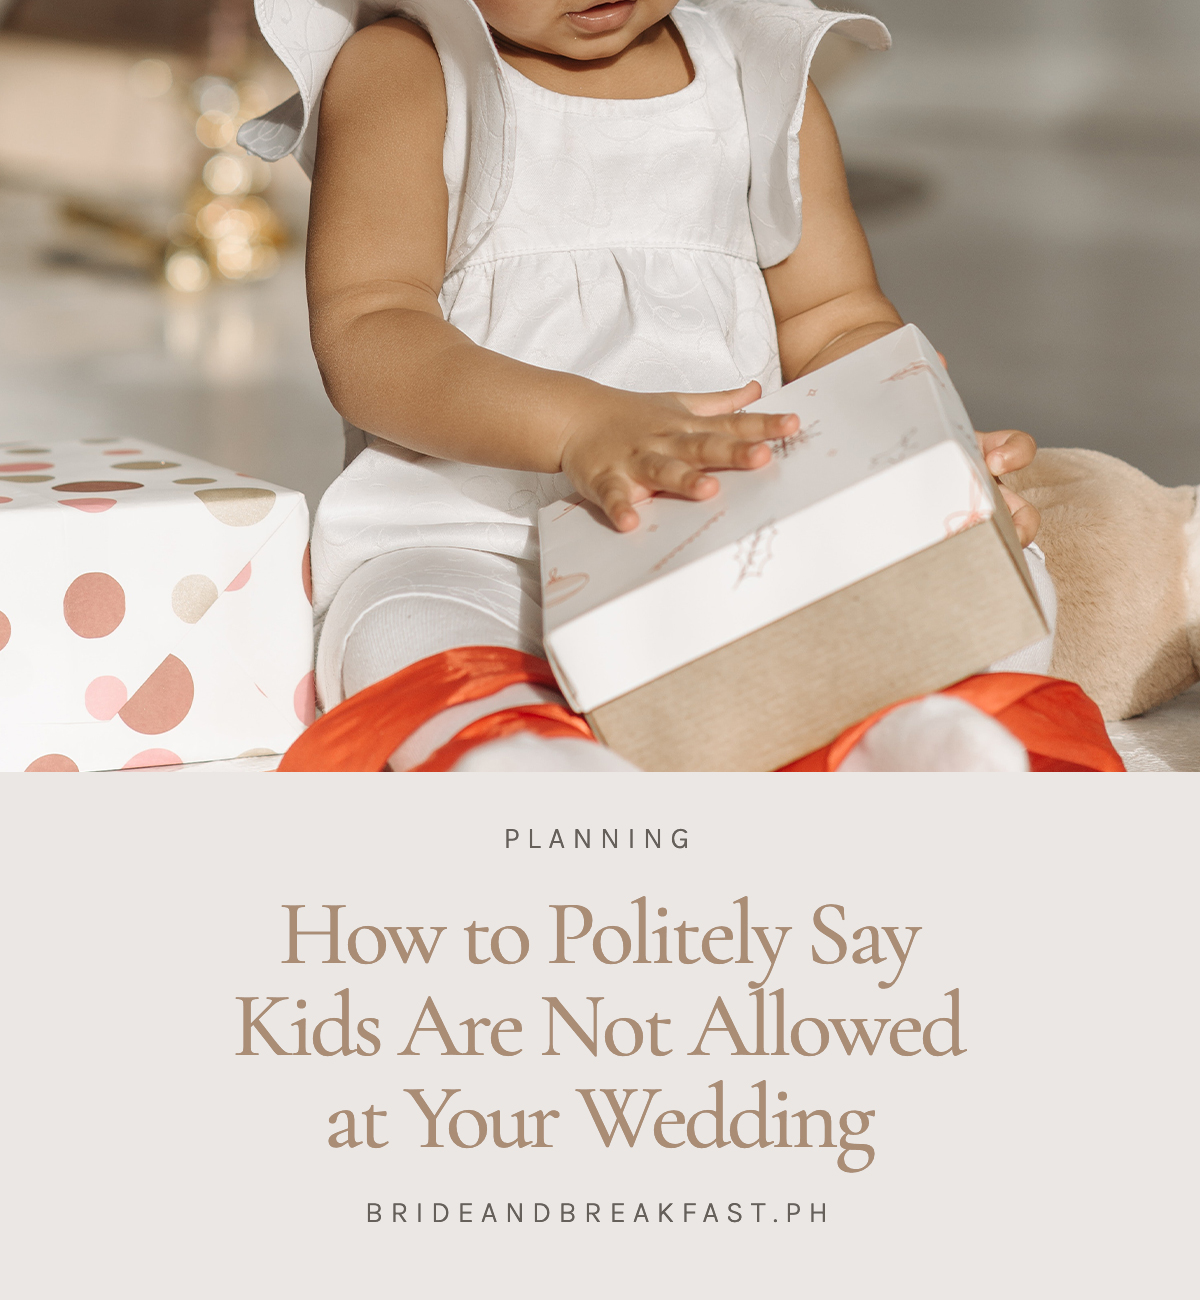 How to Politely Say Kids Are Not Allowed at Your Wedding